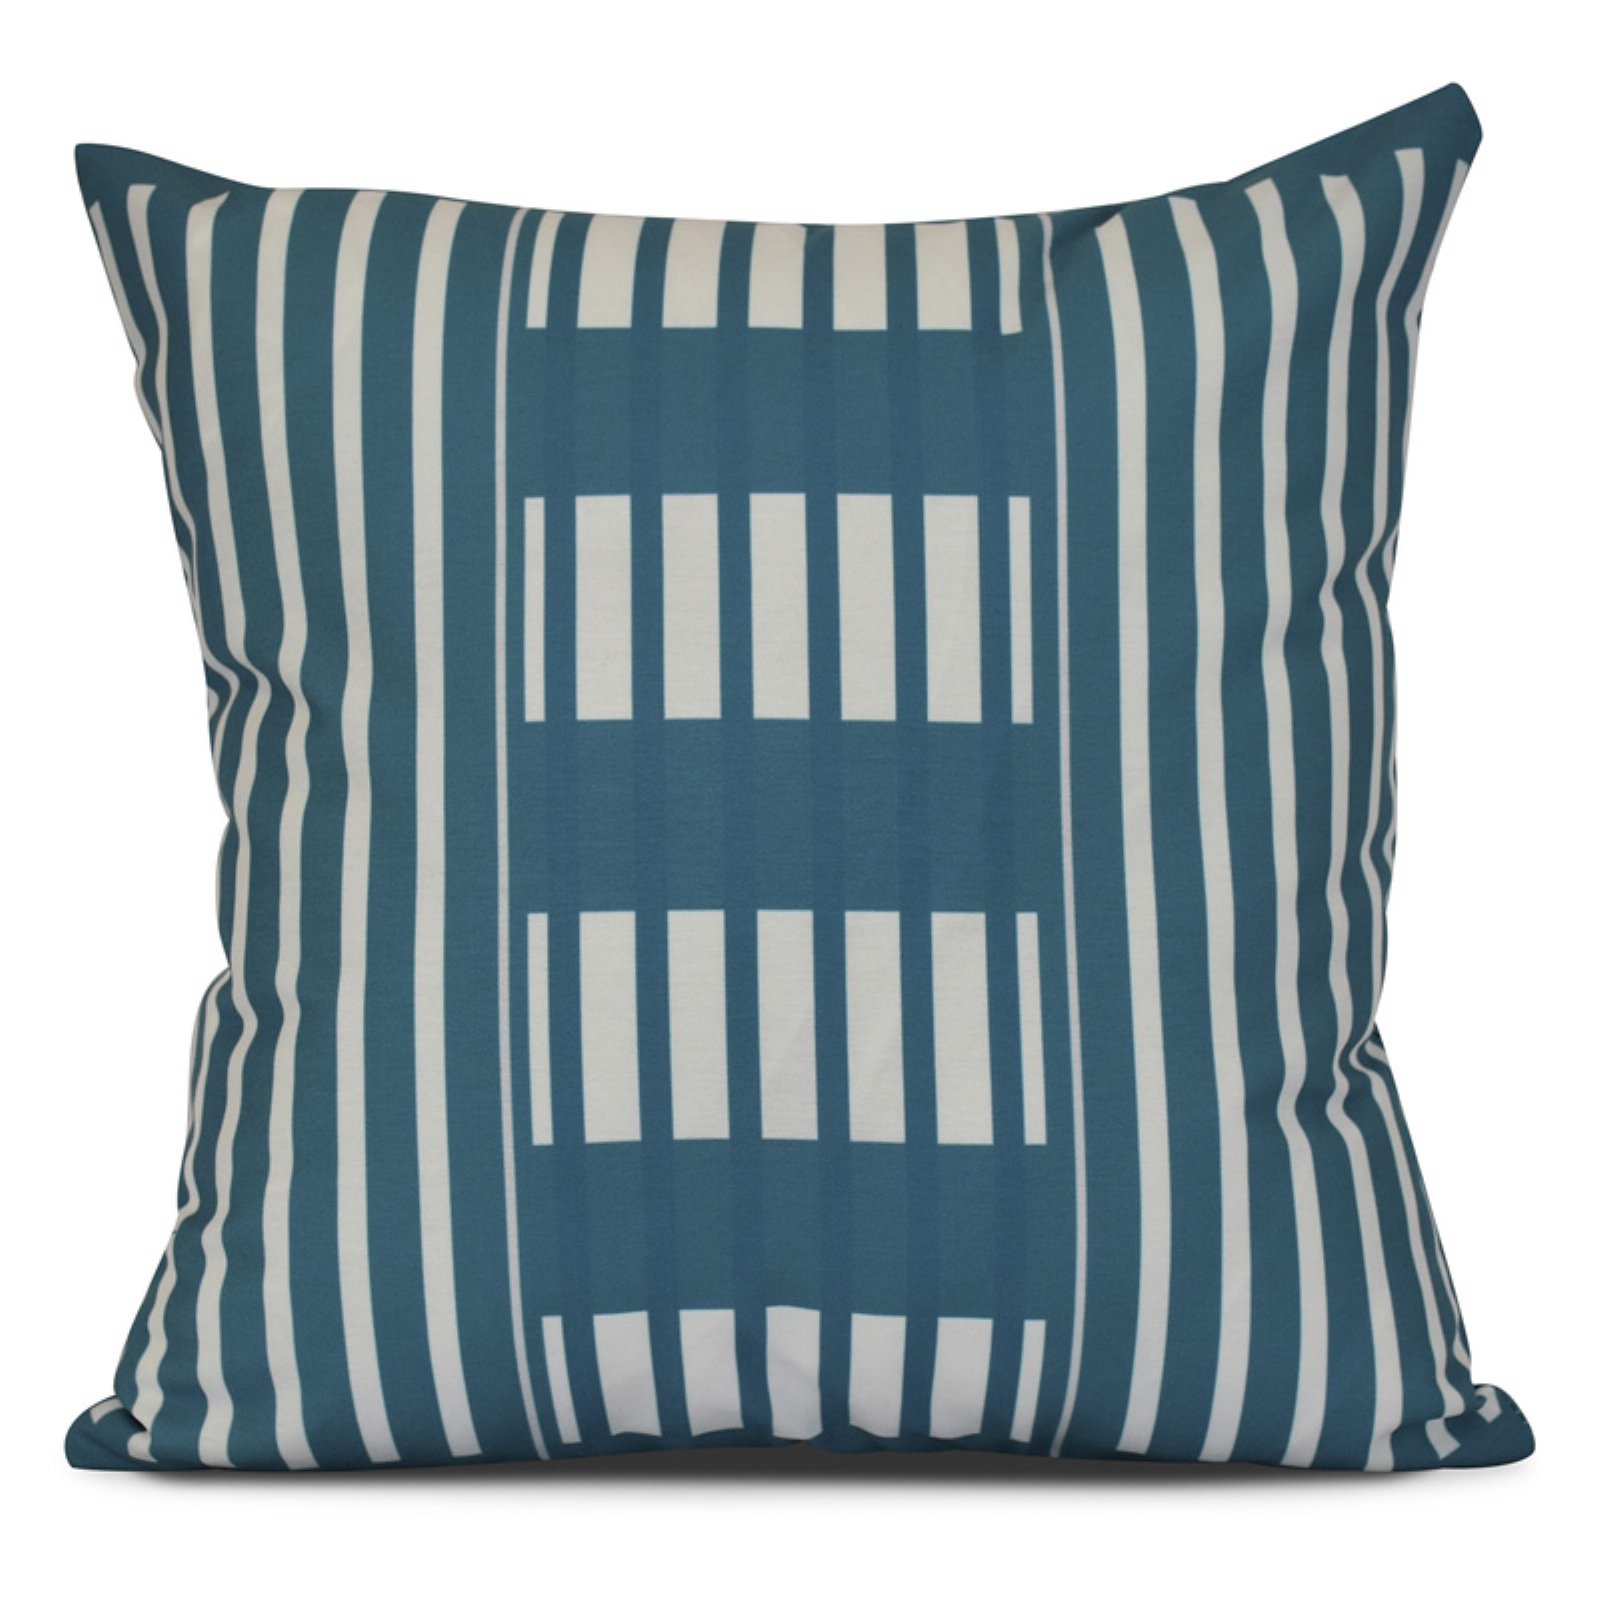 Simply Daisy, Beach Blanket, Stripe Print Outdoor Pillow - image 2 of 2